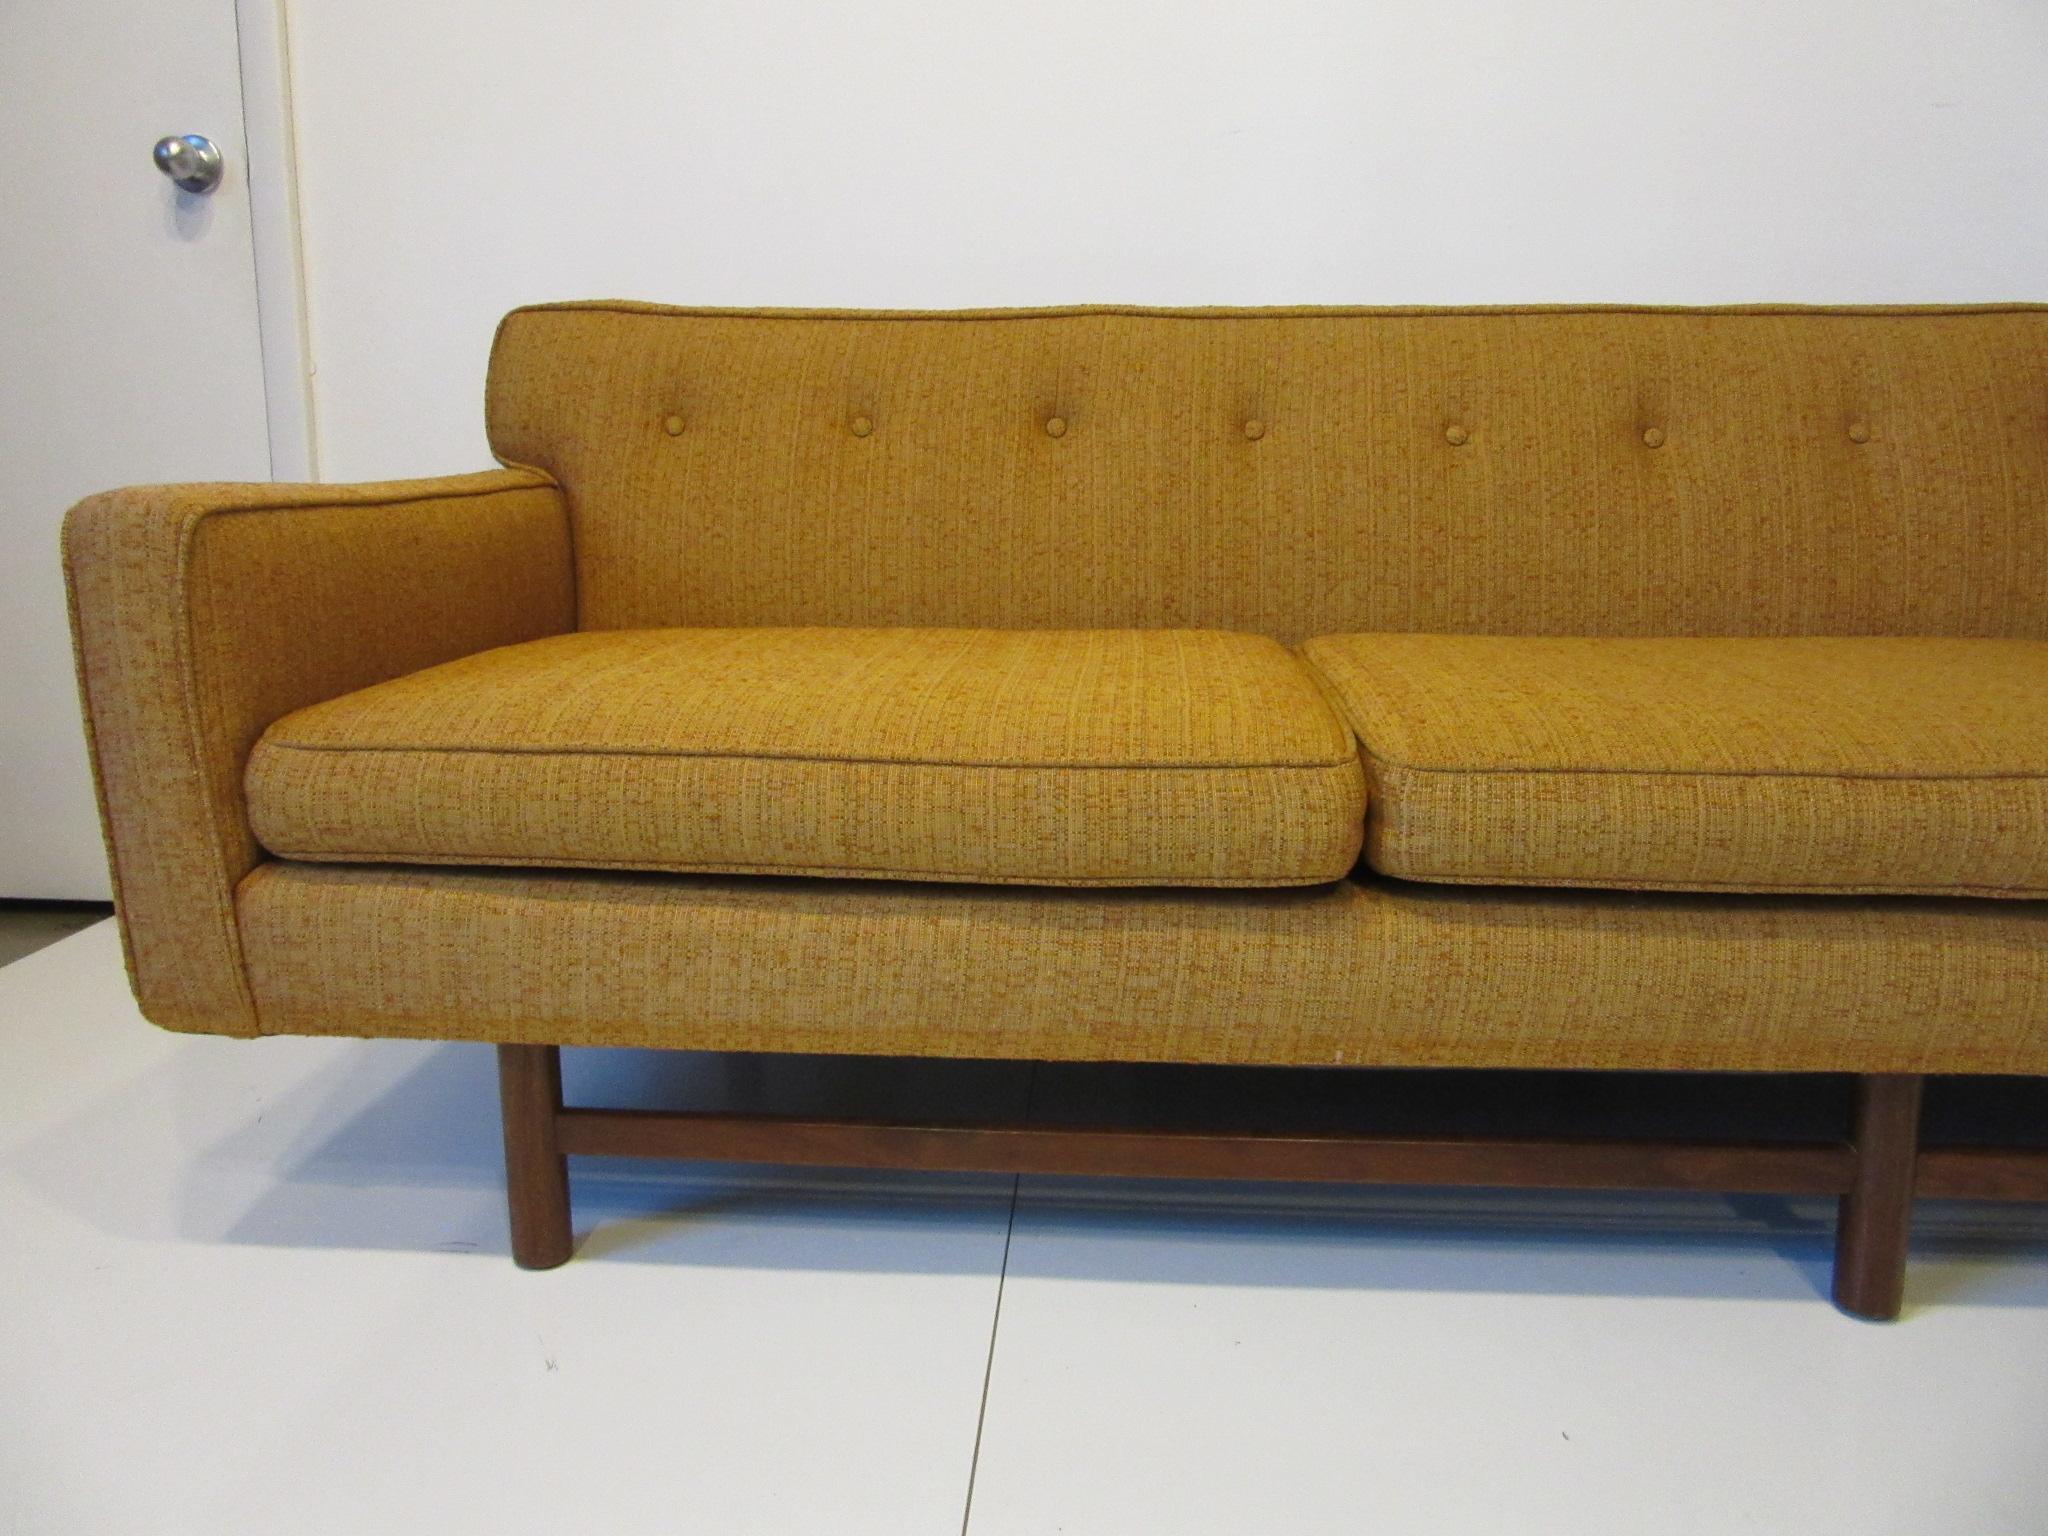 A three cushion low profile mid century sofa with button back and dark walnut legs and stretchers with overhang to each end that gives the sofa a floating affect. Designed in the manner of the Harvey Probber Furniture company, the sofa has great